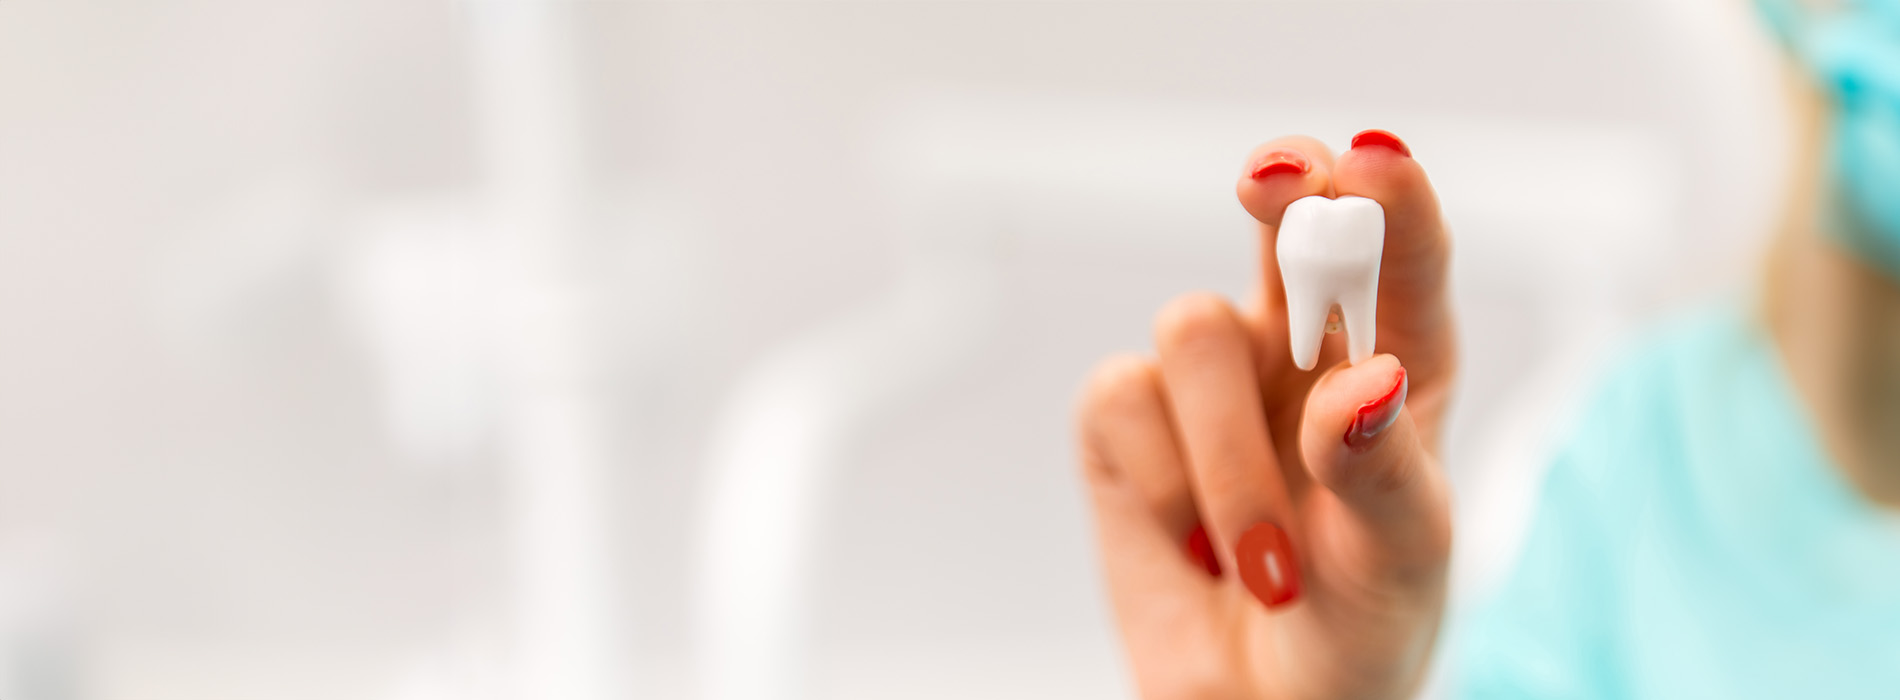 The image features a close-up of a person s hand holding a small white object, which appears to be a toothbrush or dental tool.